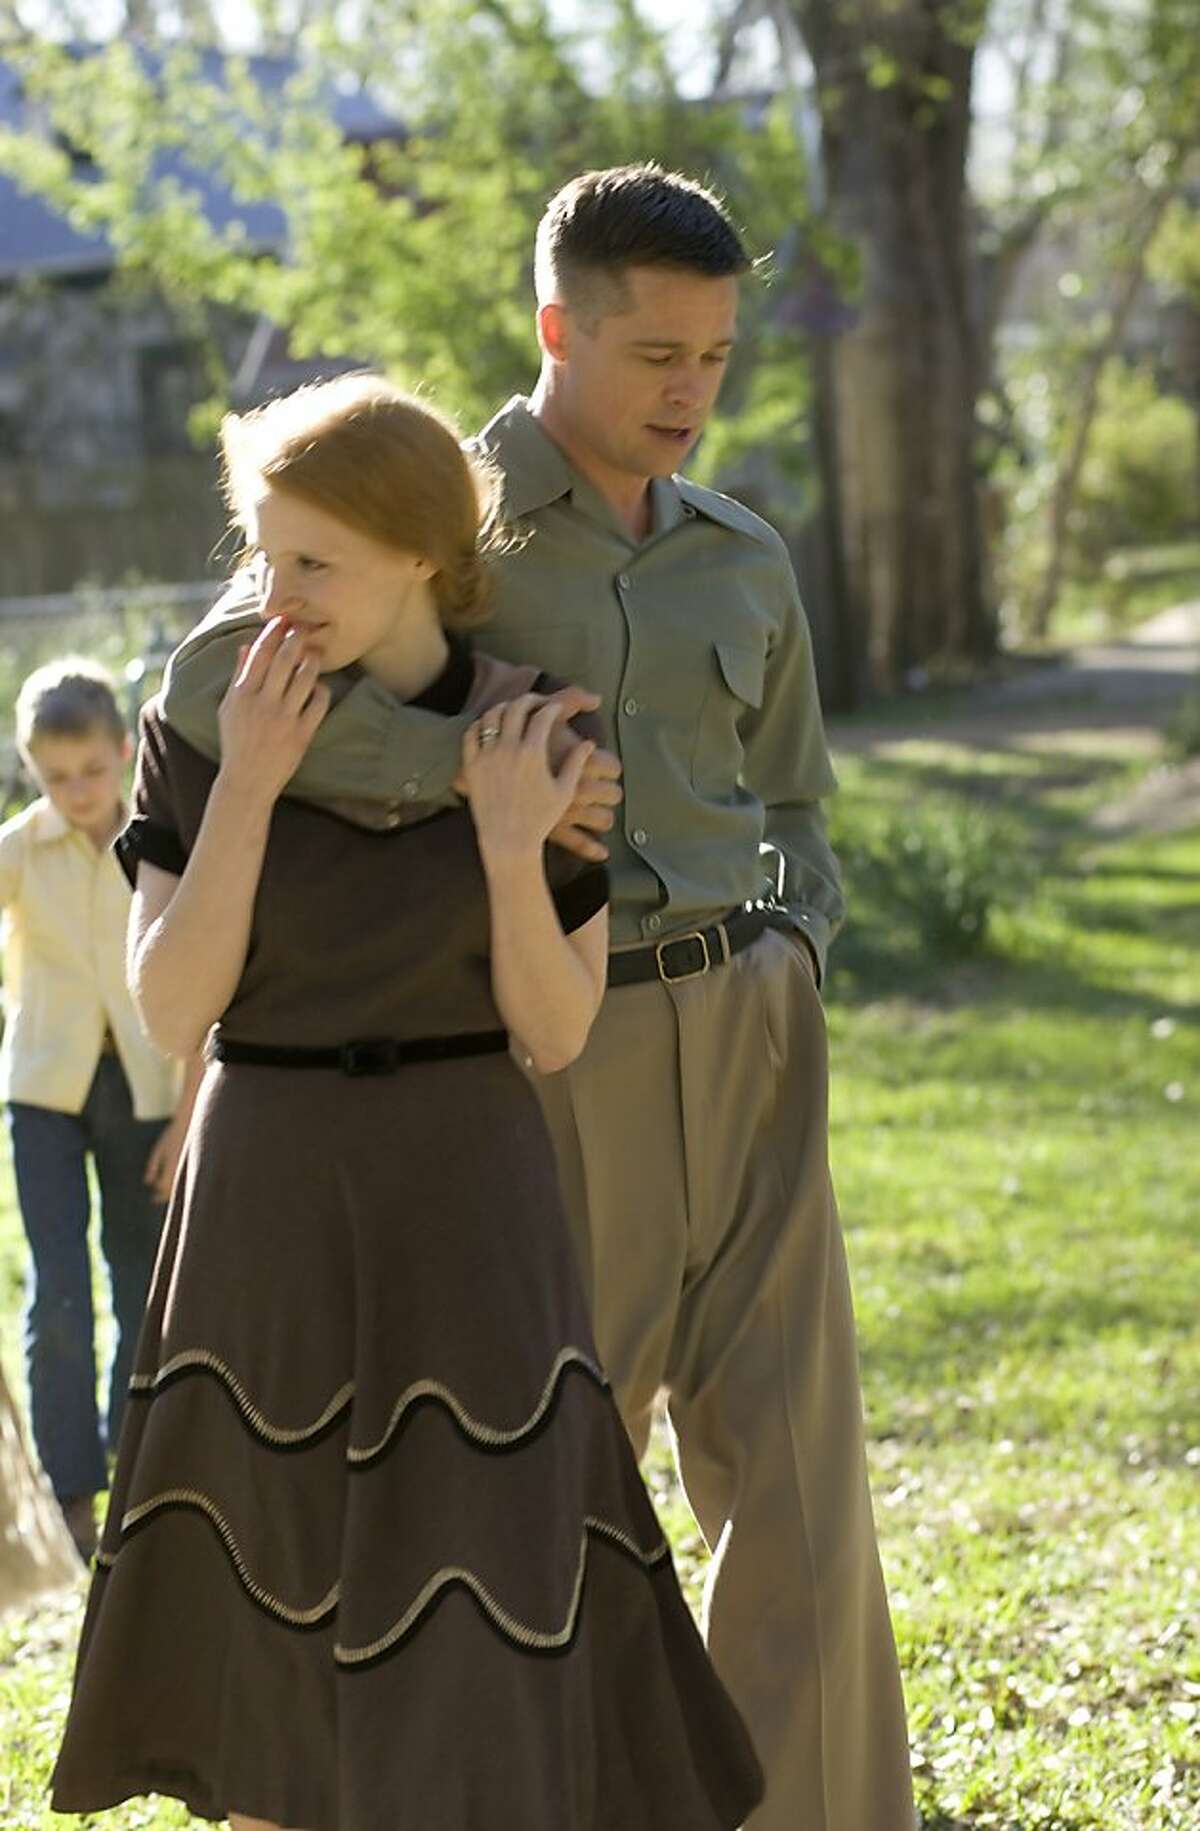 from left: Jessica Chastain and Brad Pitt in The Tree of Life. Ran on: 06-03-2011 Jessica Chastain and Brad Pitt, top, are the parents of three boys in Tree of Life. Ran on: 06-19-2011 Jessica Chastain and Brad Pitt in The Tree of Life: ambitious but long.